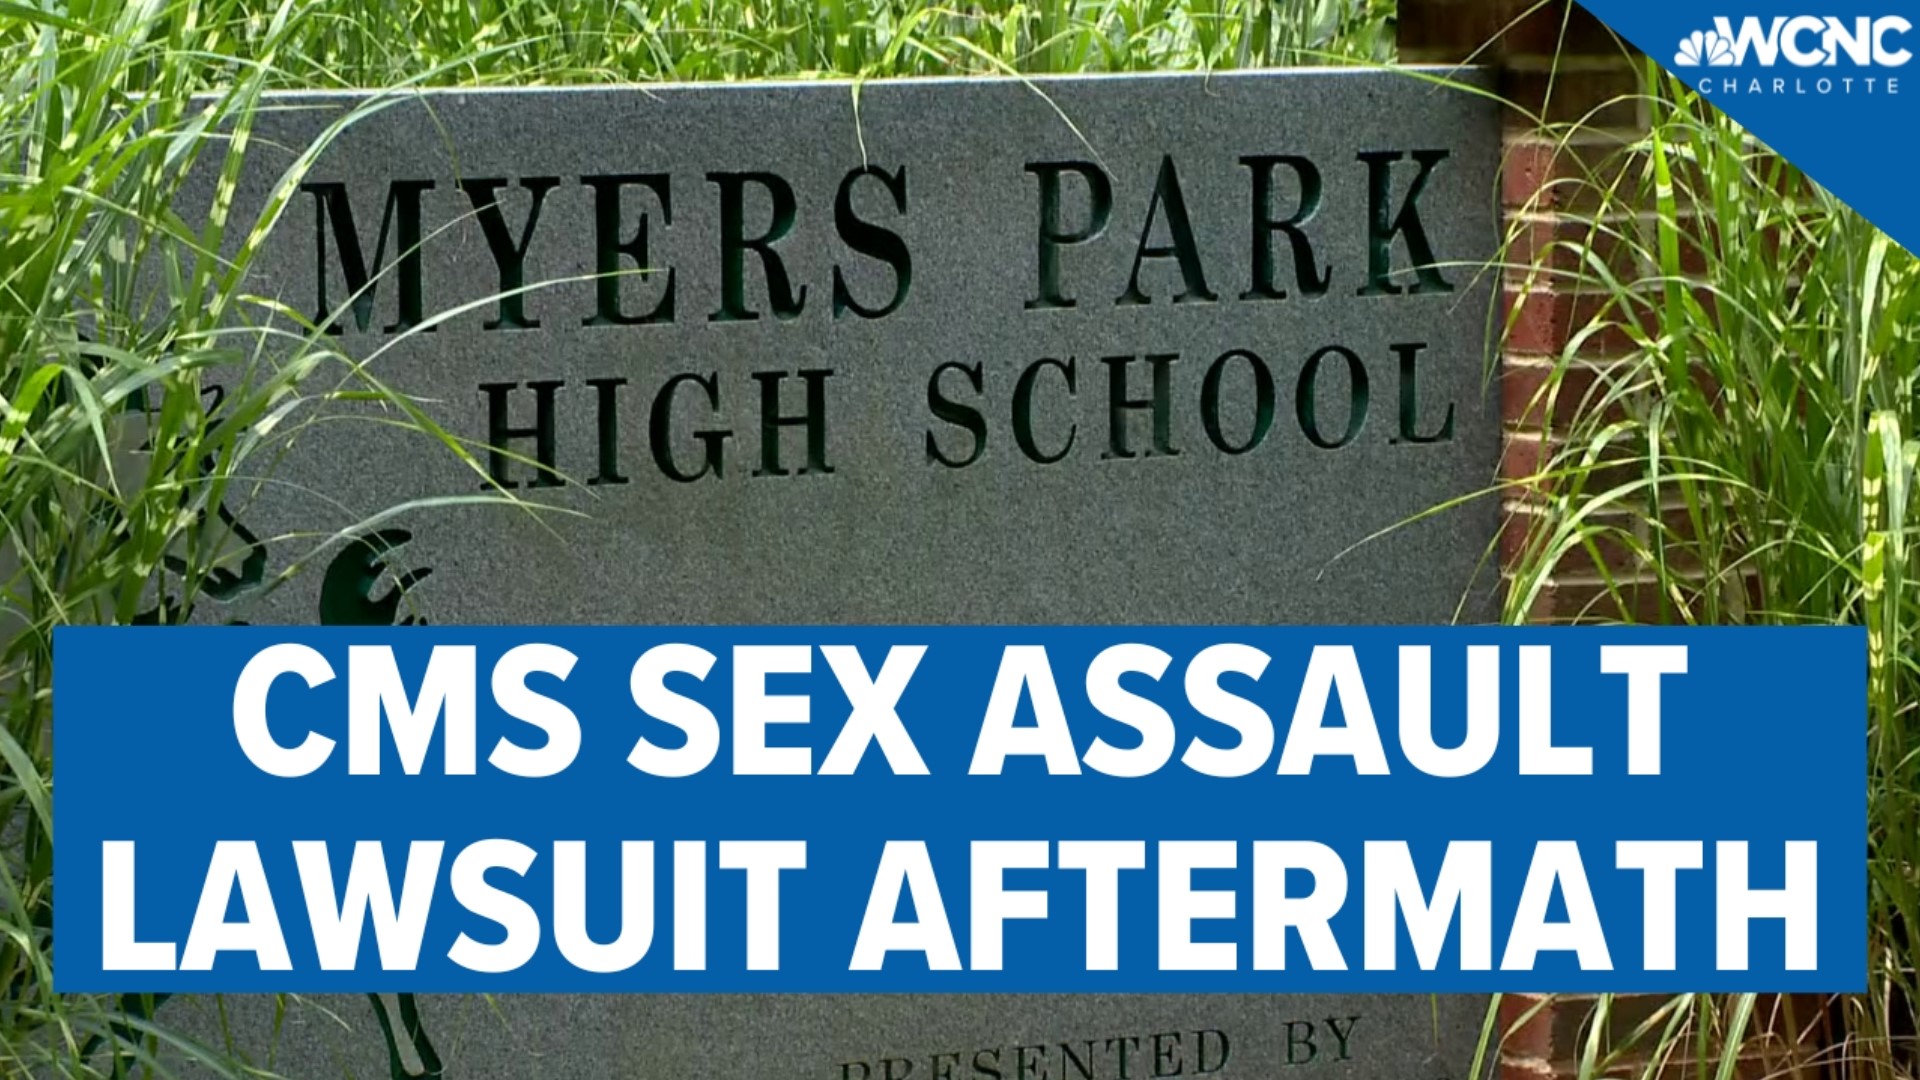 A jury who sat in the trial of a former Myers Park High student against CMS BOE ruled CMS didn't violate the former student's Title IX rights.